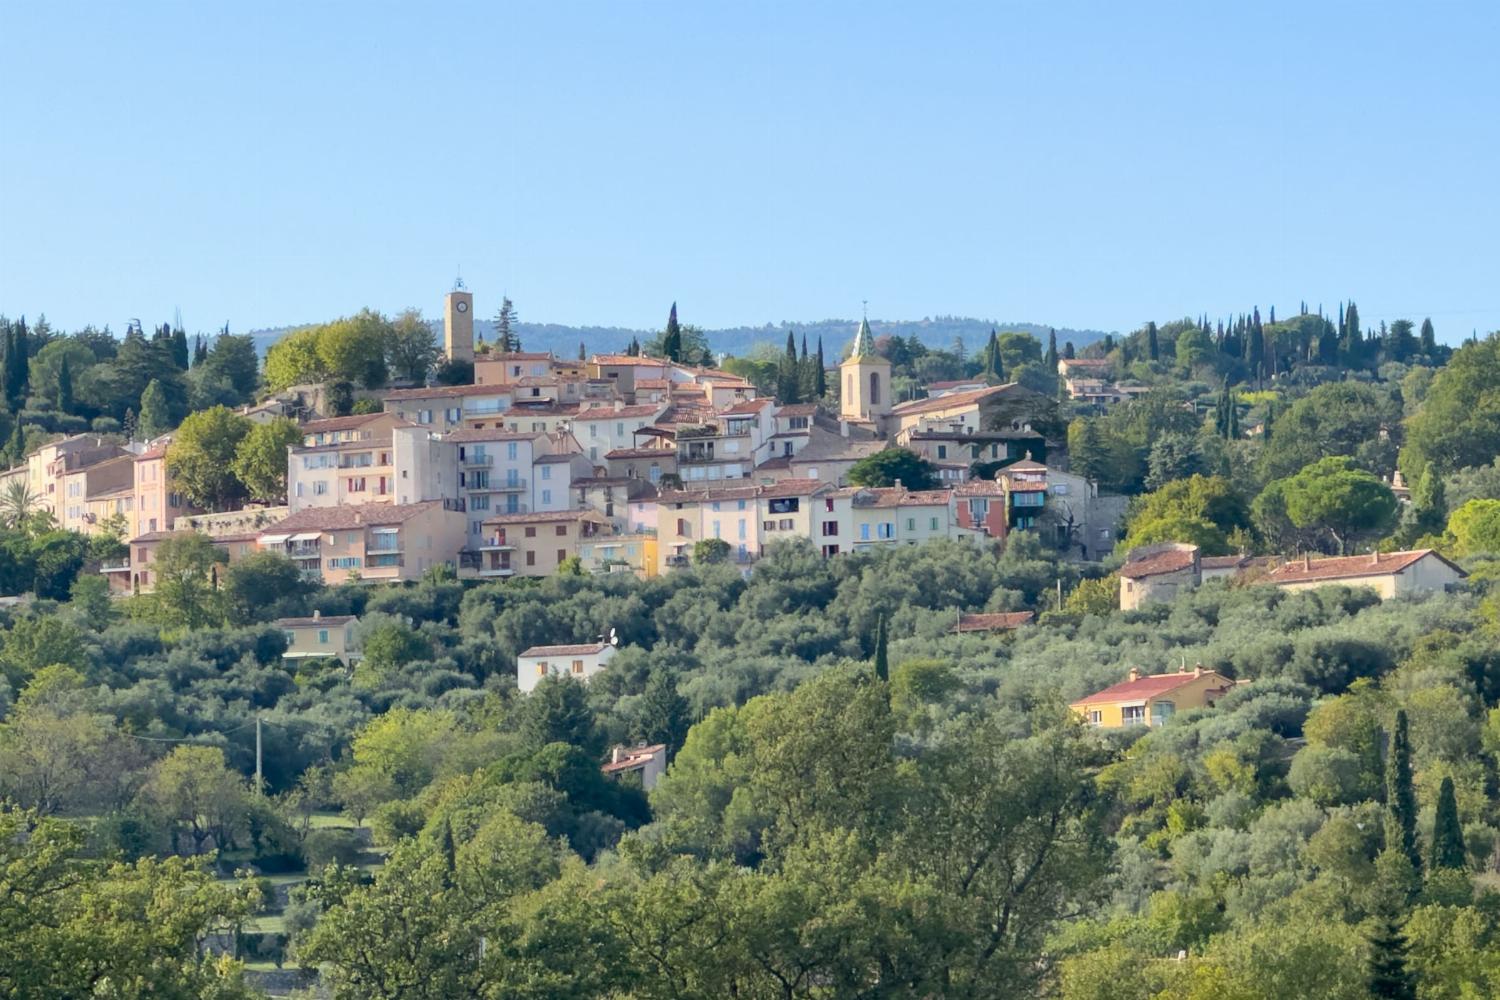 View of Tourettes village from the villa